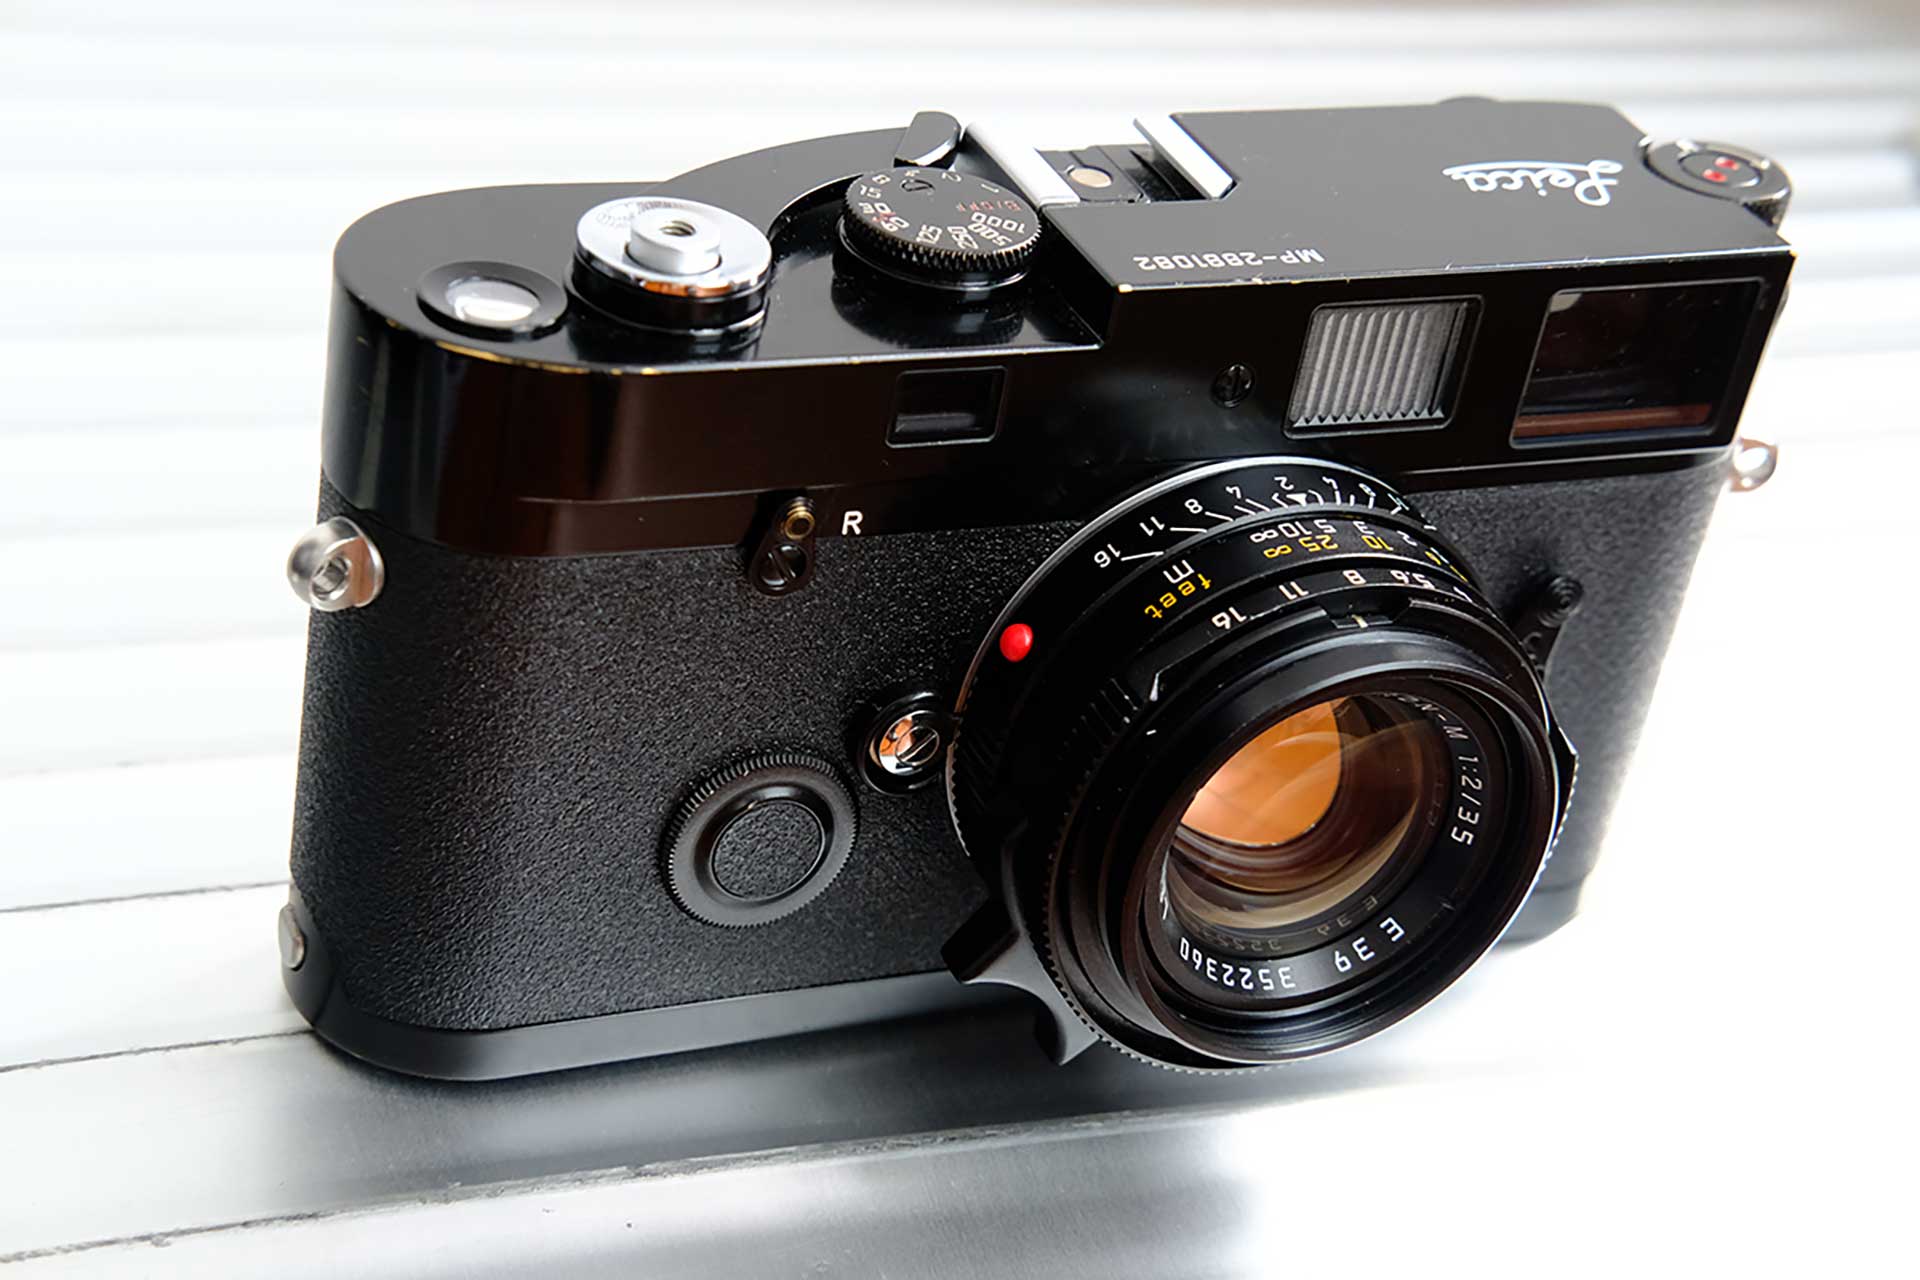 leica acquire not working